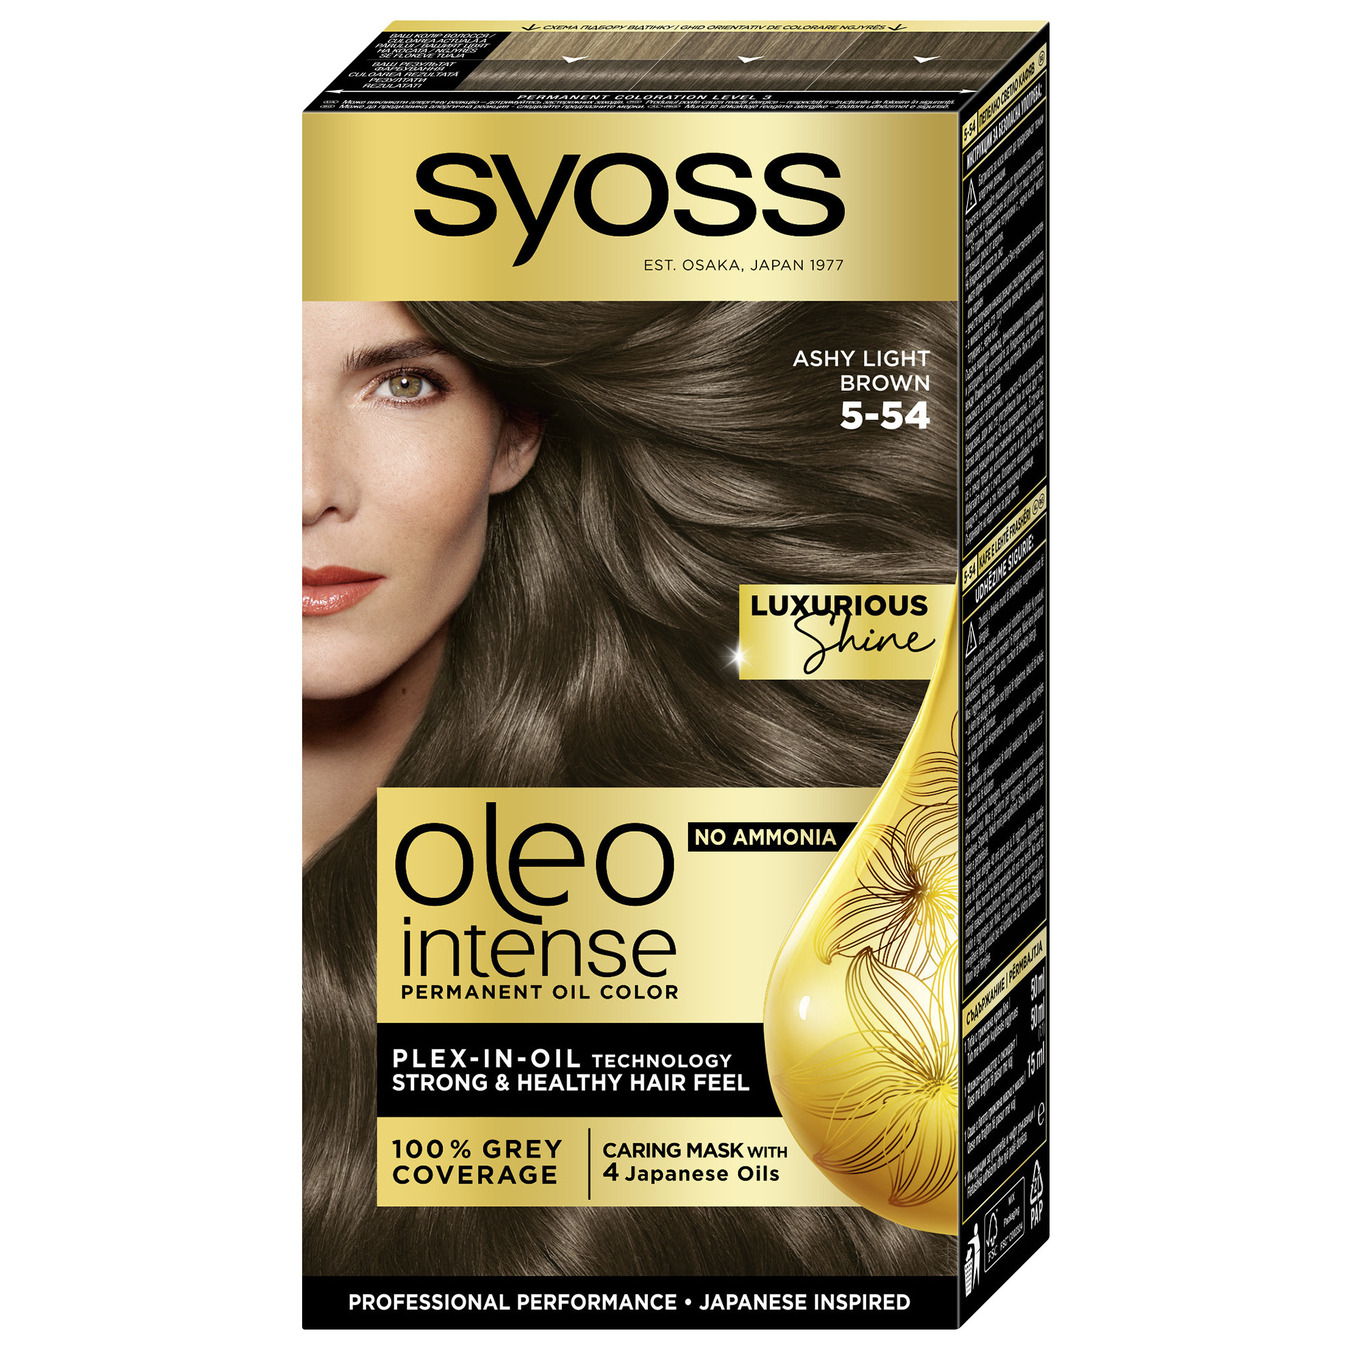 Syoss Hair conditioner Oleo Intense 5-54 cold light brown